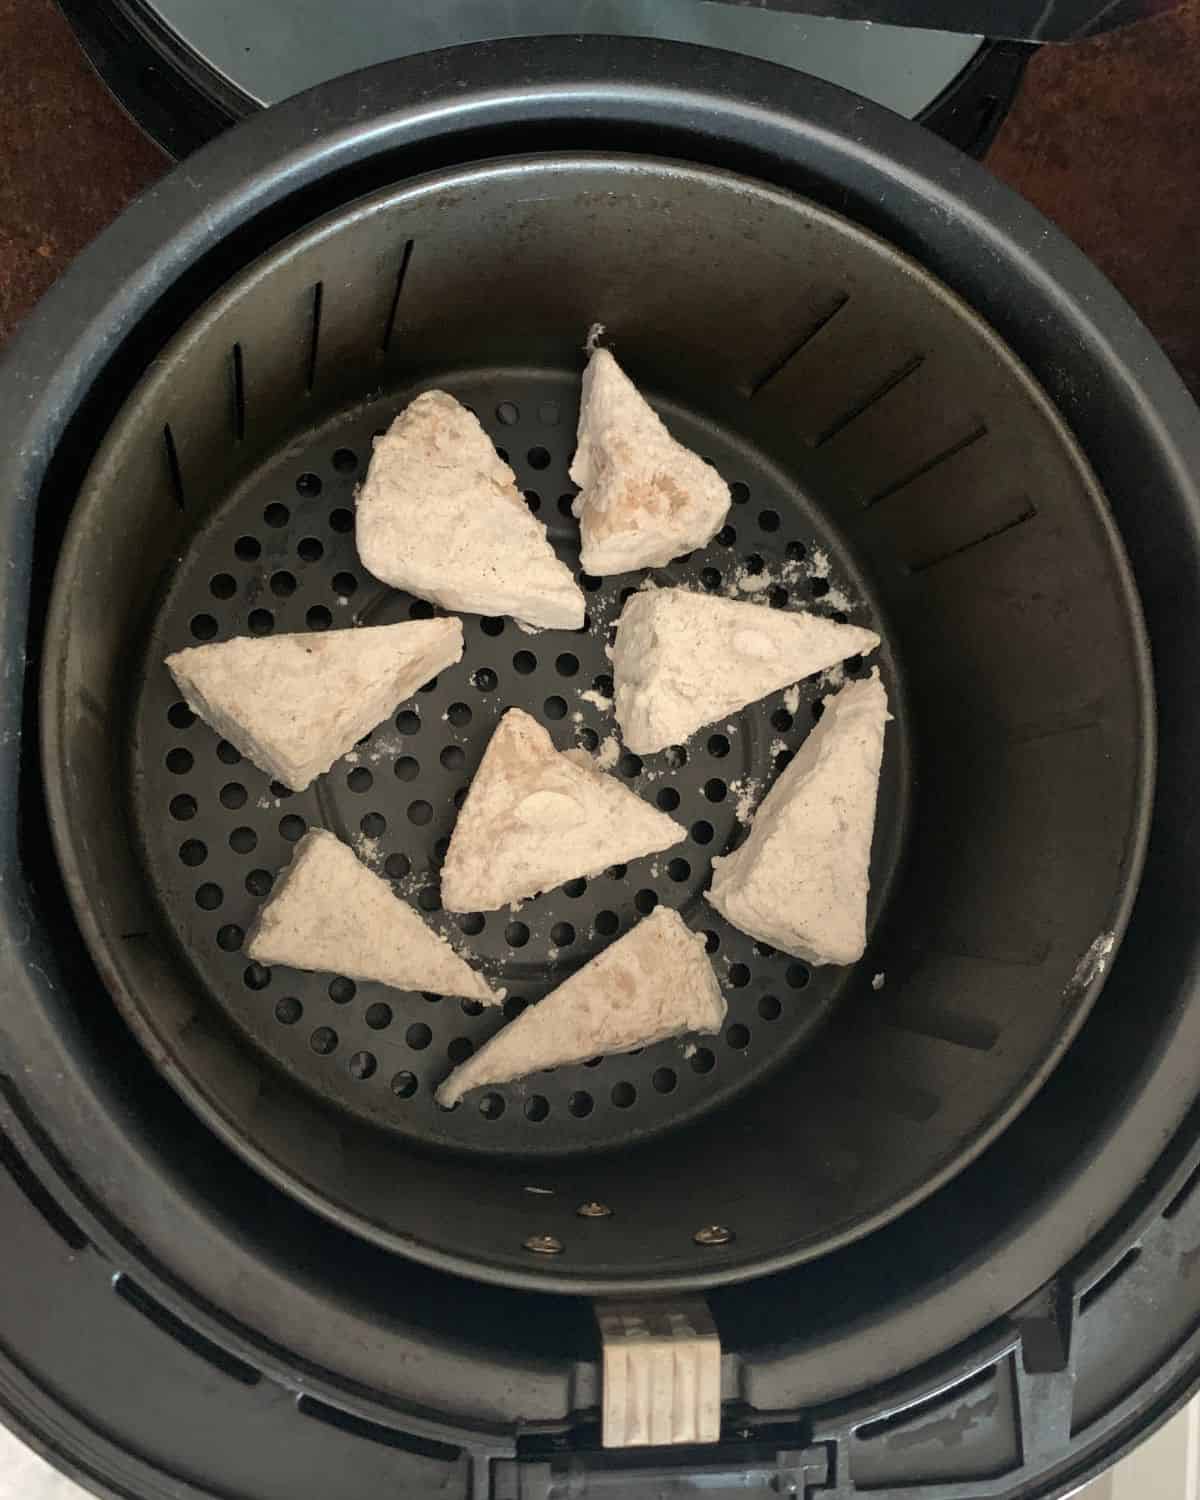 Coated young jackfruit pieces in an air fryer basket.